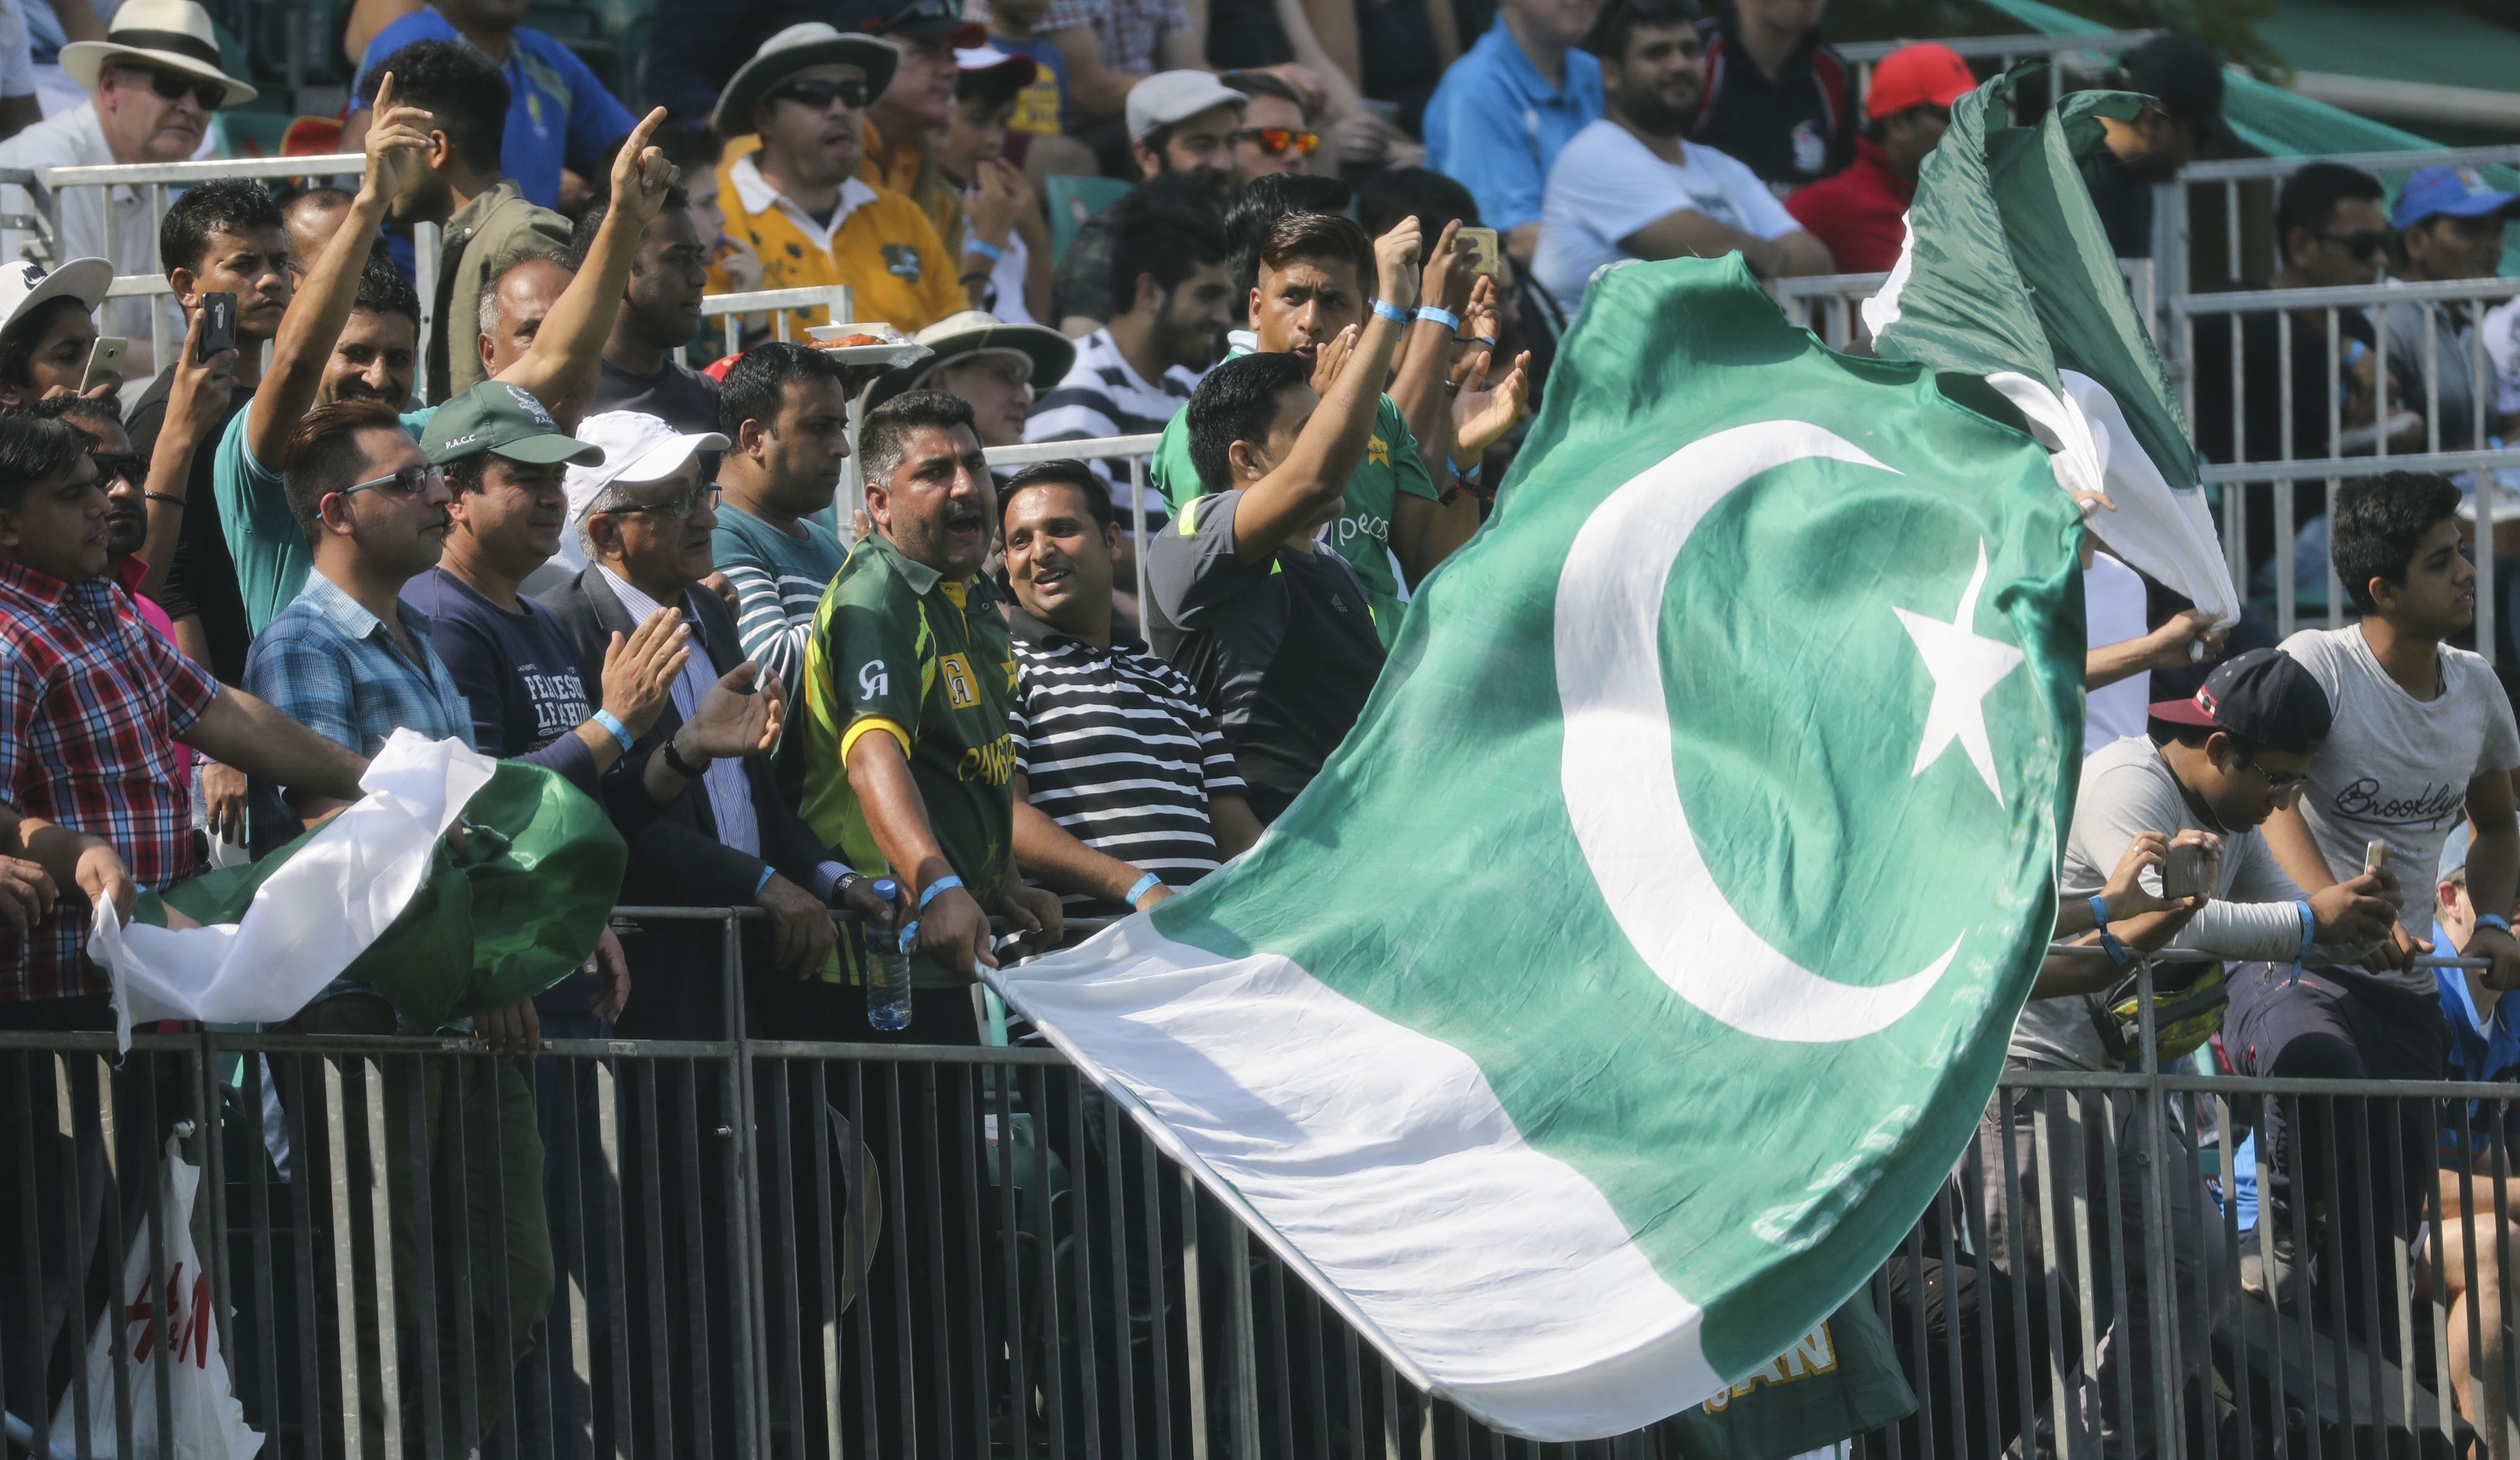 Pakistan fans cheer on their team during the first day of the Hong Kong World Sixes at Kowloon Cricket Club. Photo: Edward Wong